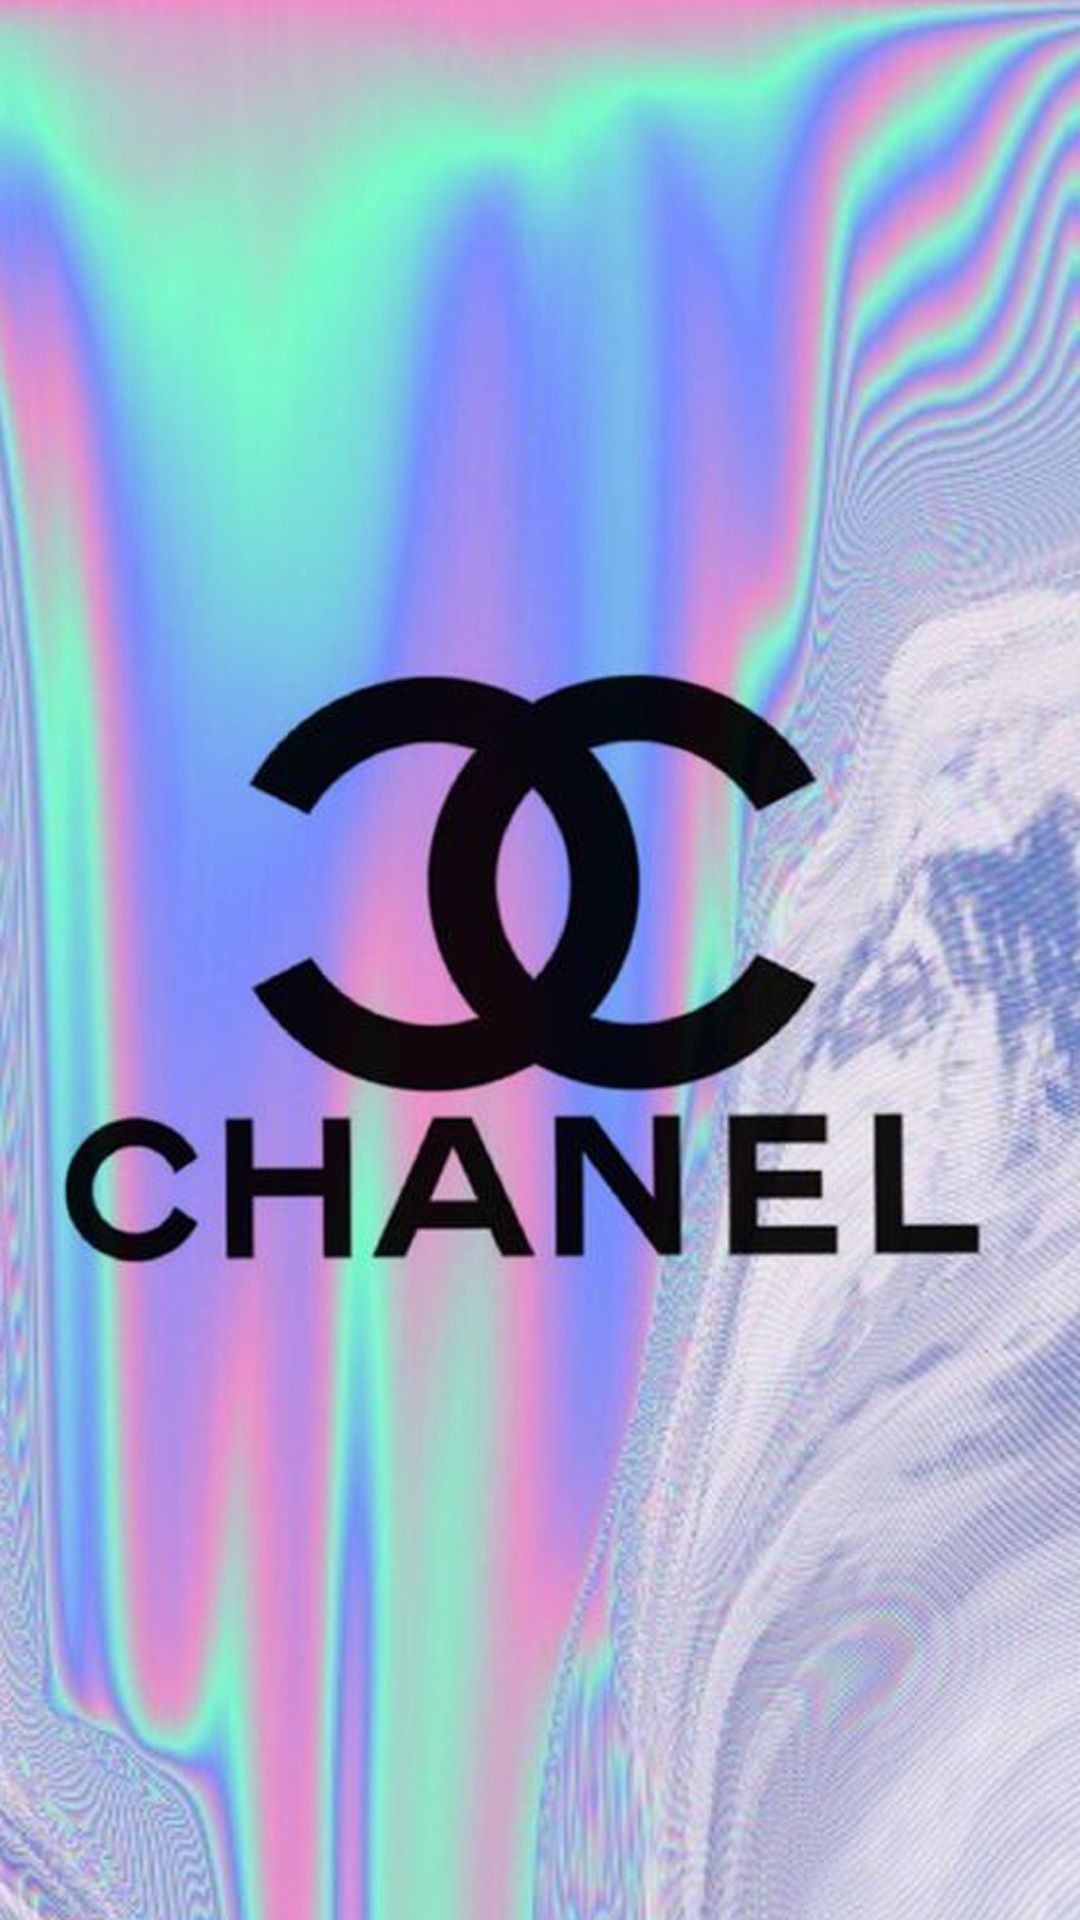 Chanel Tumblr Wallpaper, Iphone Background Wallpaper, - Girly Cute  Wallpapers For Iphone - 1080x1920 Wallpaper 